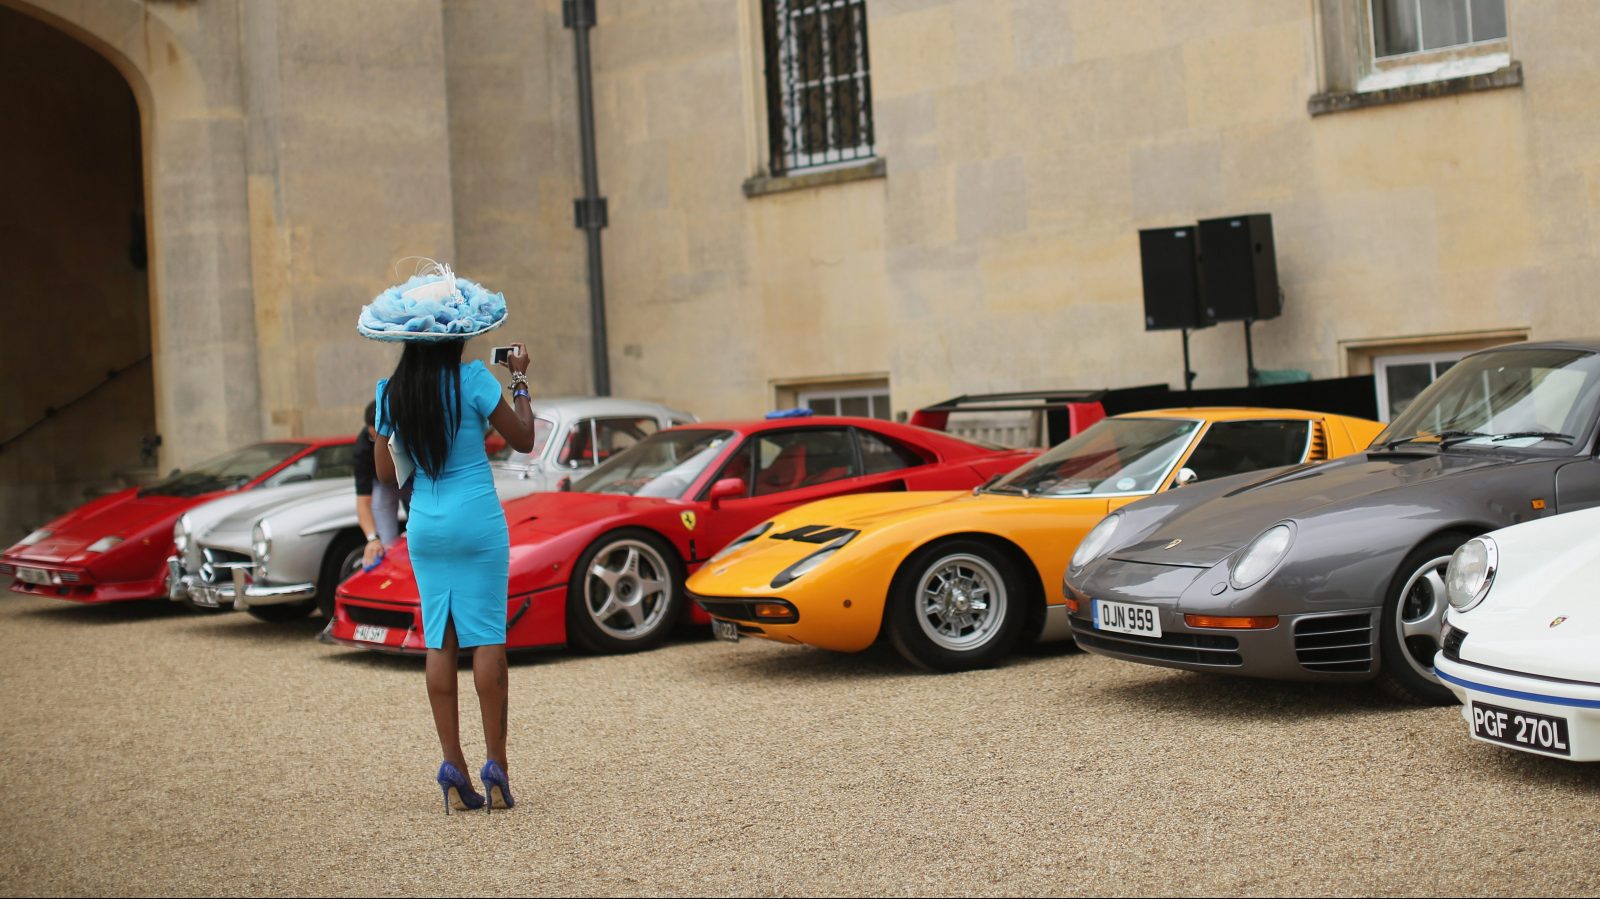 Cars are displayed at the 'Salon Prive' event at Syon Park stately home on September 4, 2014 in London, England.